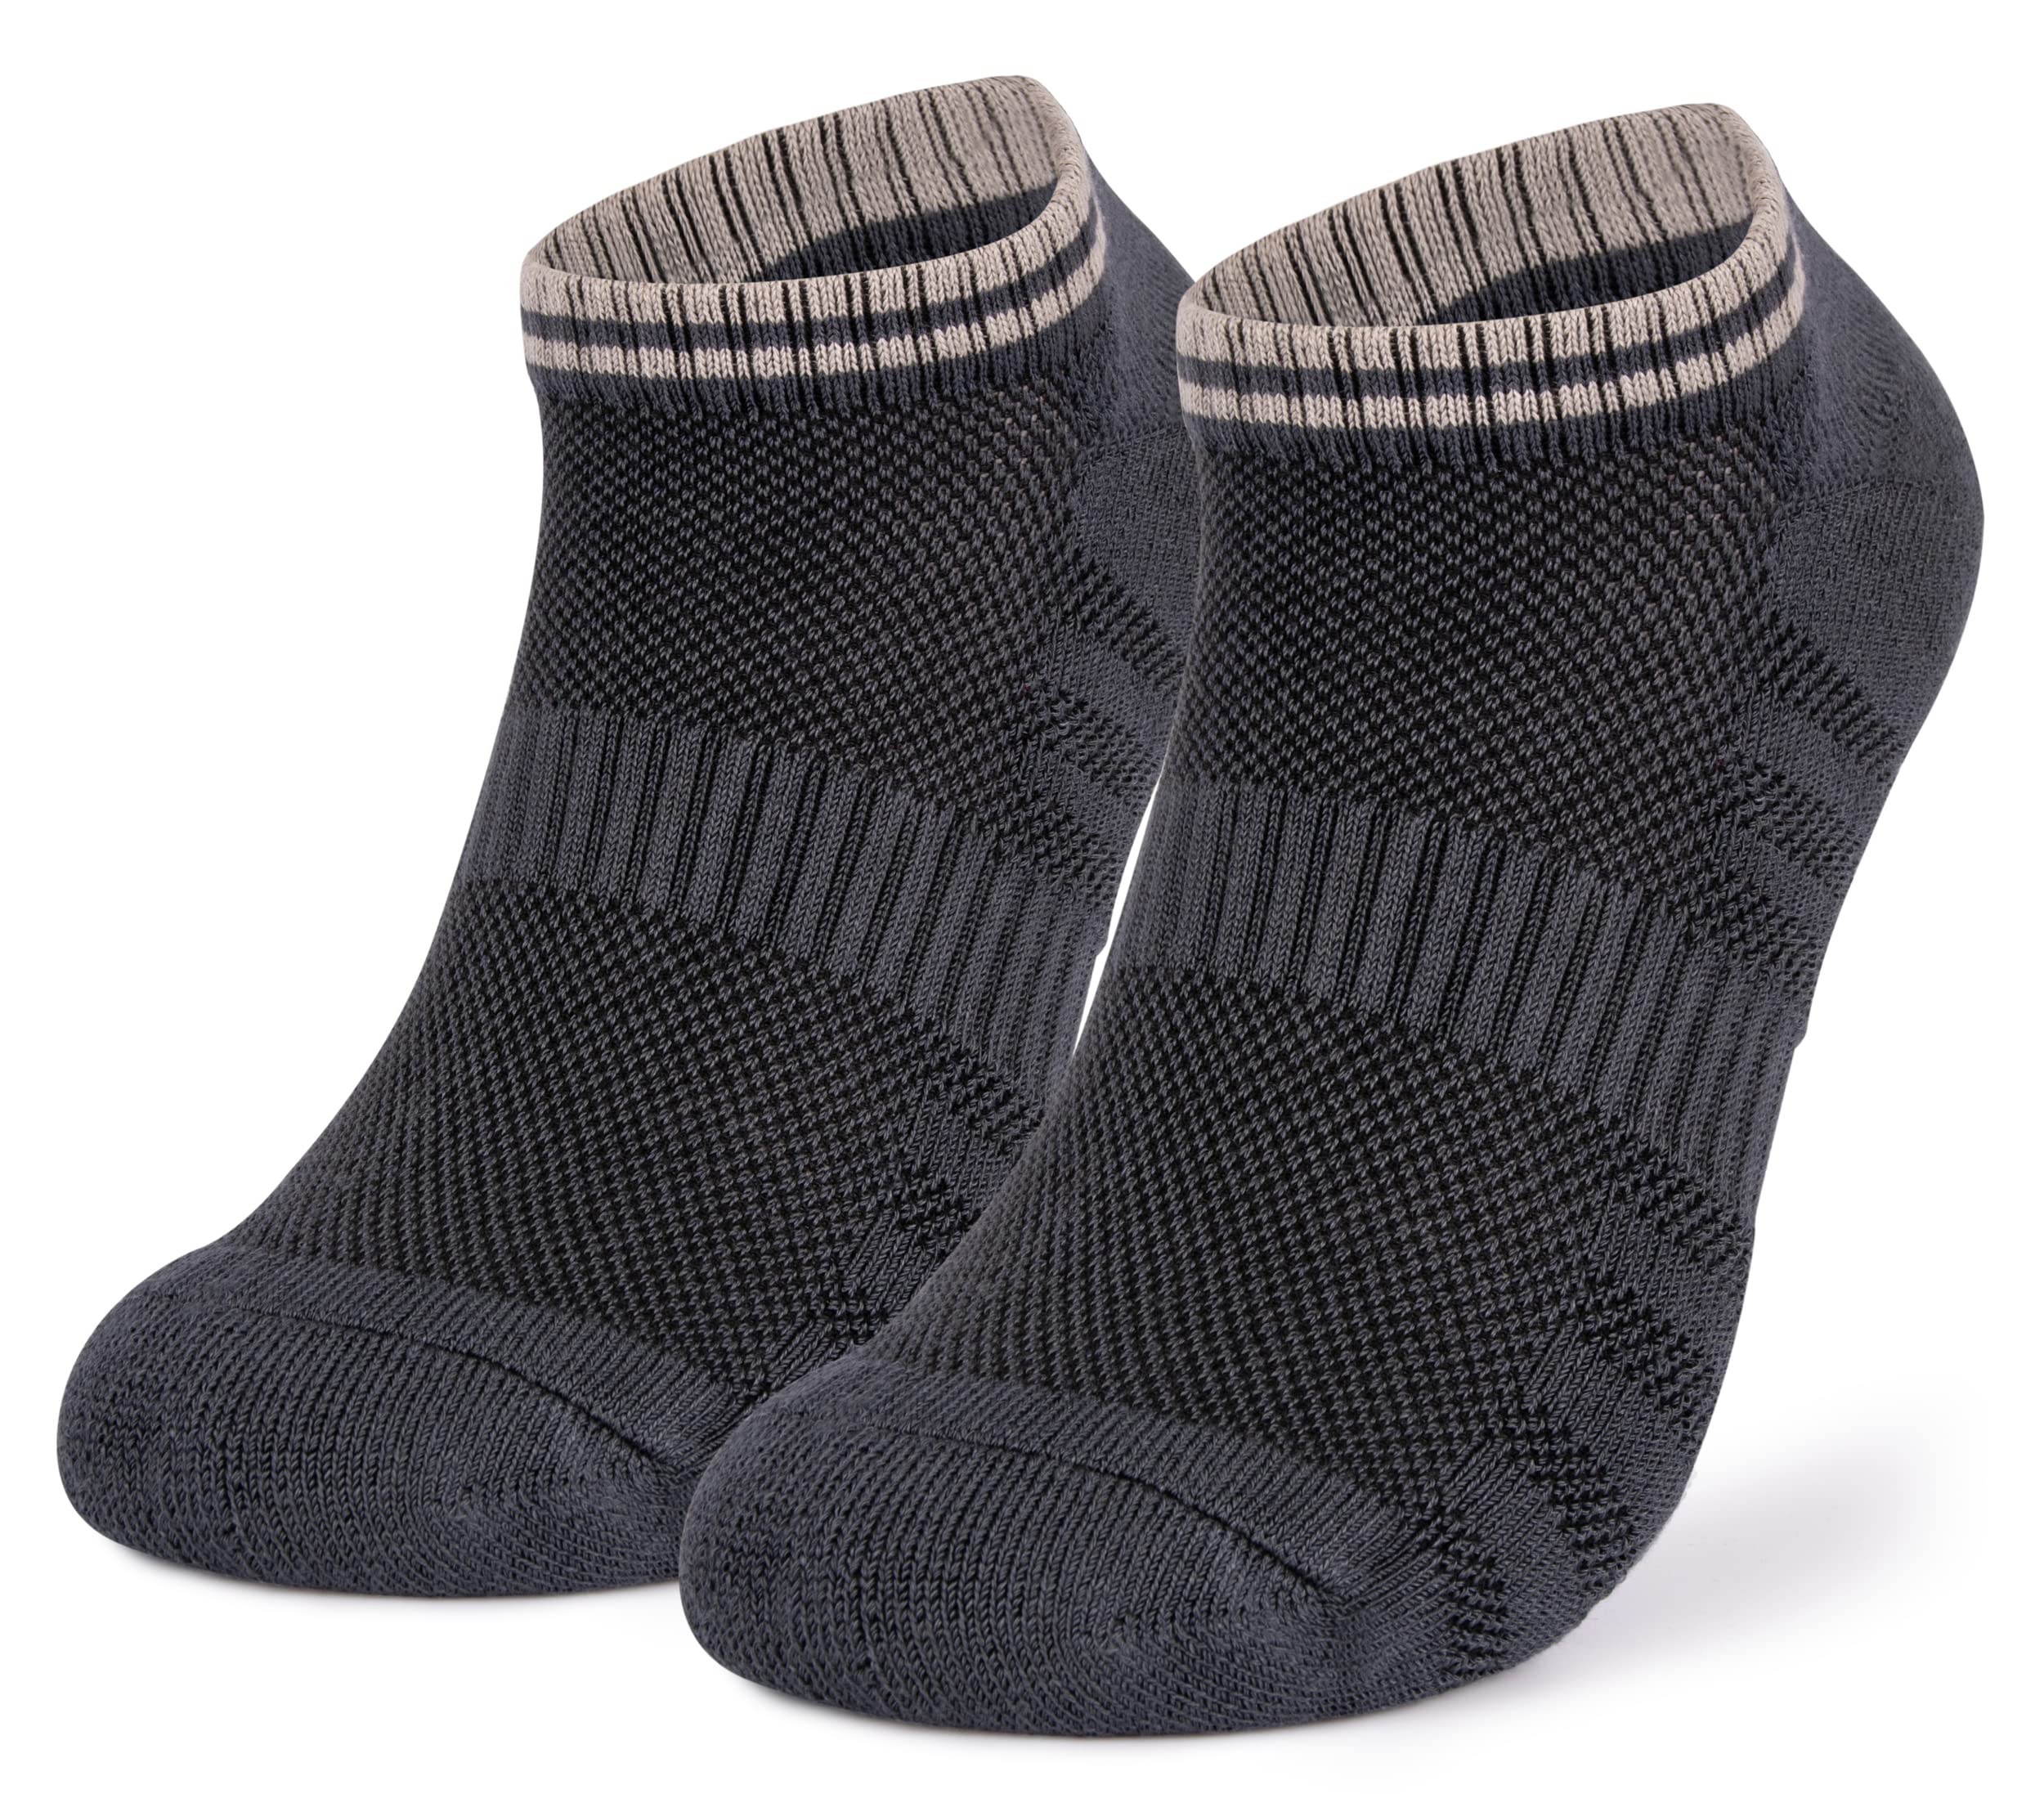 Mush Bamboo Socks for Sports & Casual Wear- Ultra Soft, Anti Odor, Breathable Mesh Design Low Cut Ankle Length Pack of 3,(Navy,Grey,Black) UK Size 6-10